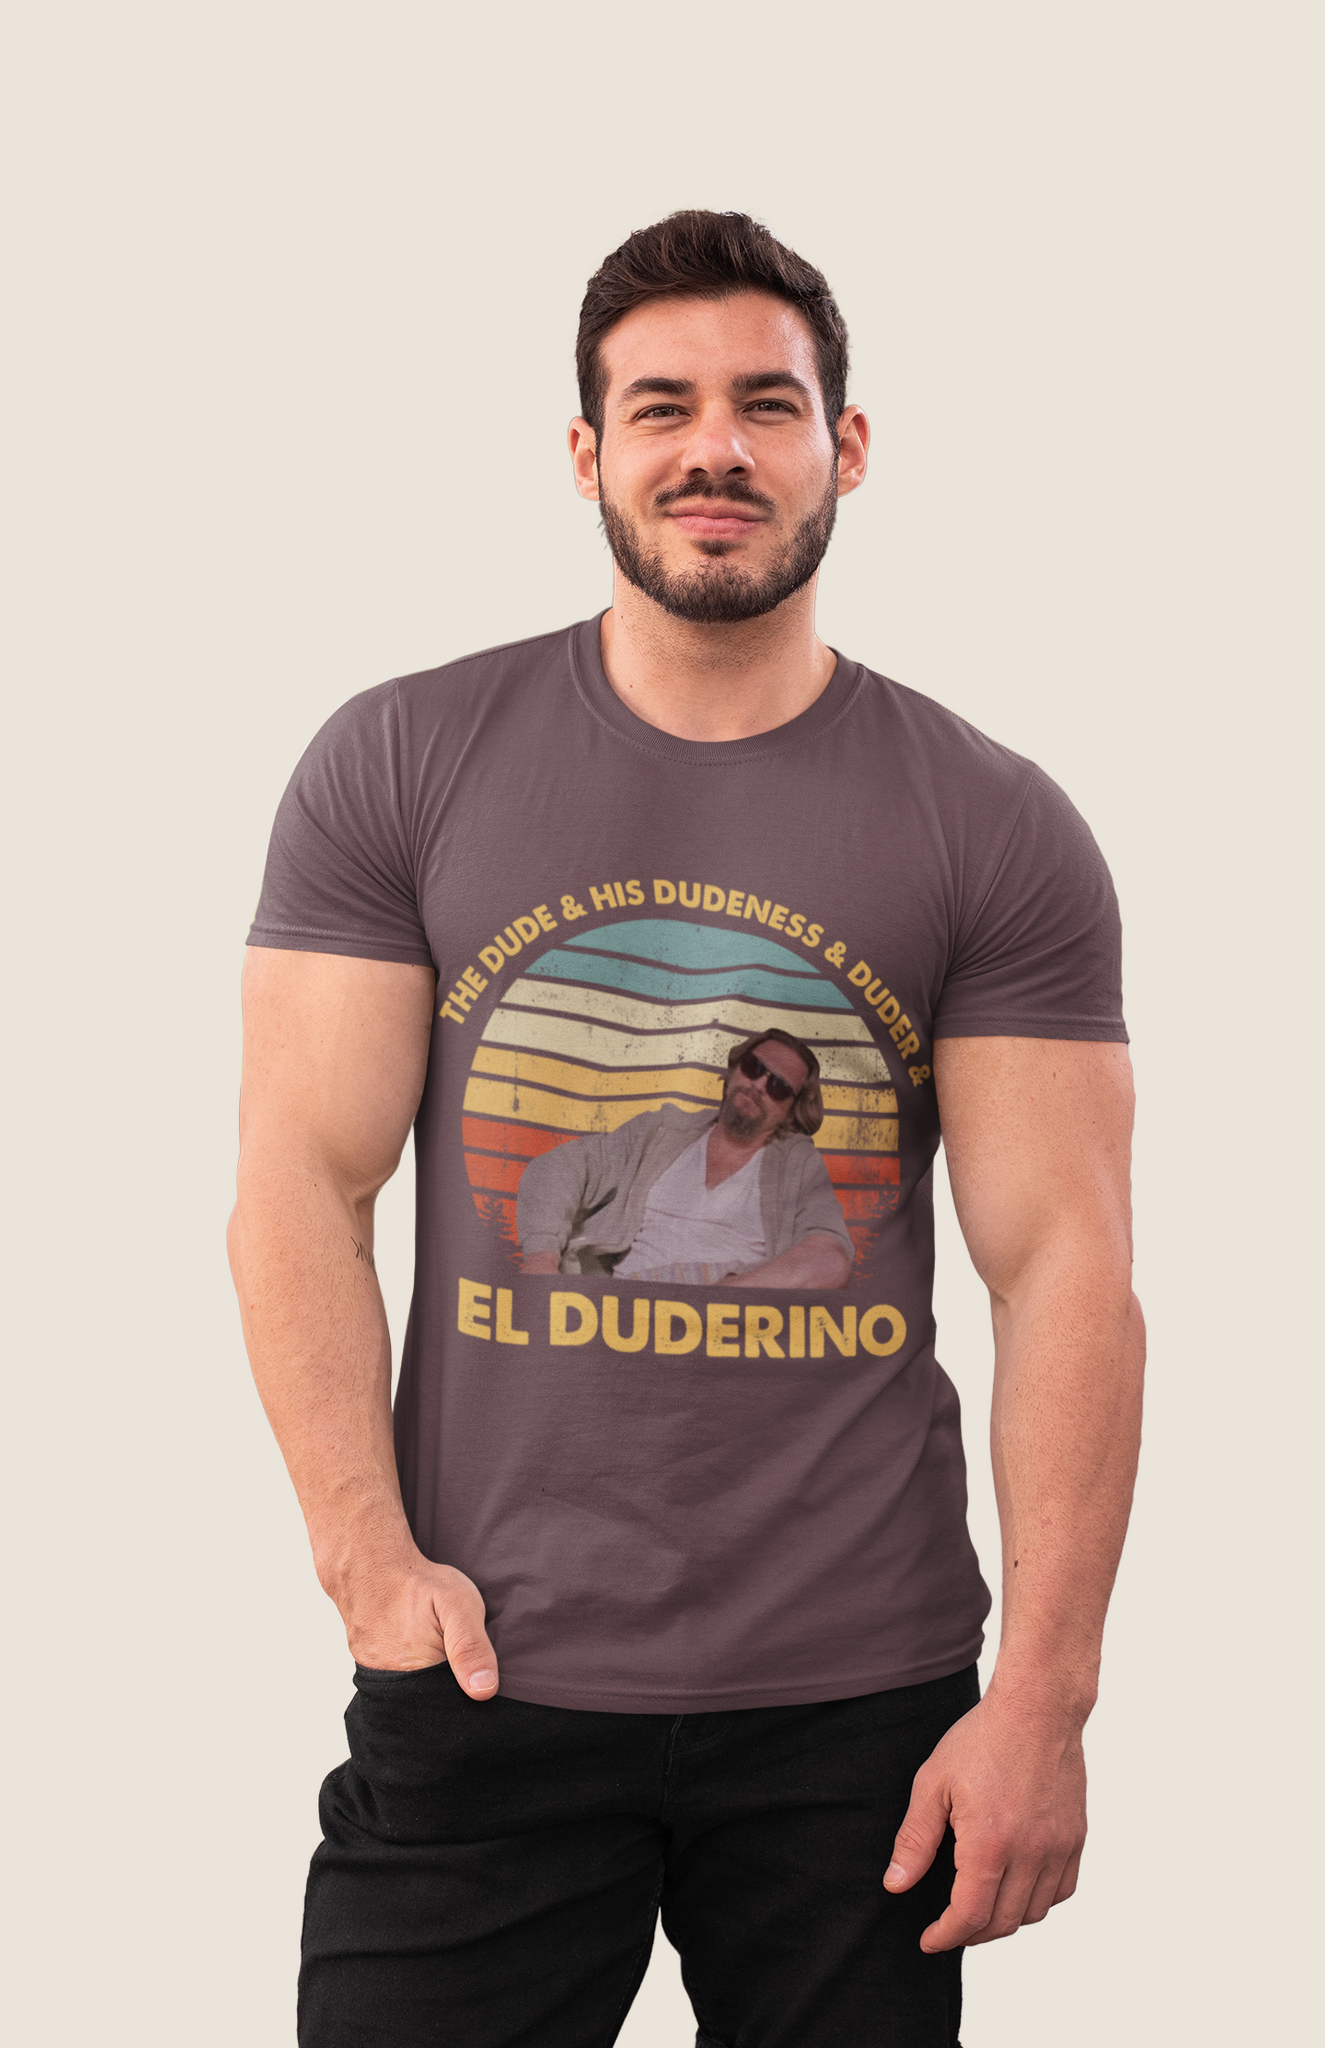 The Big Lebowski Vintage T Shirt, The Dude And His Dudeness And Duder And El Duderino Tshirt, The Dude T Shirt